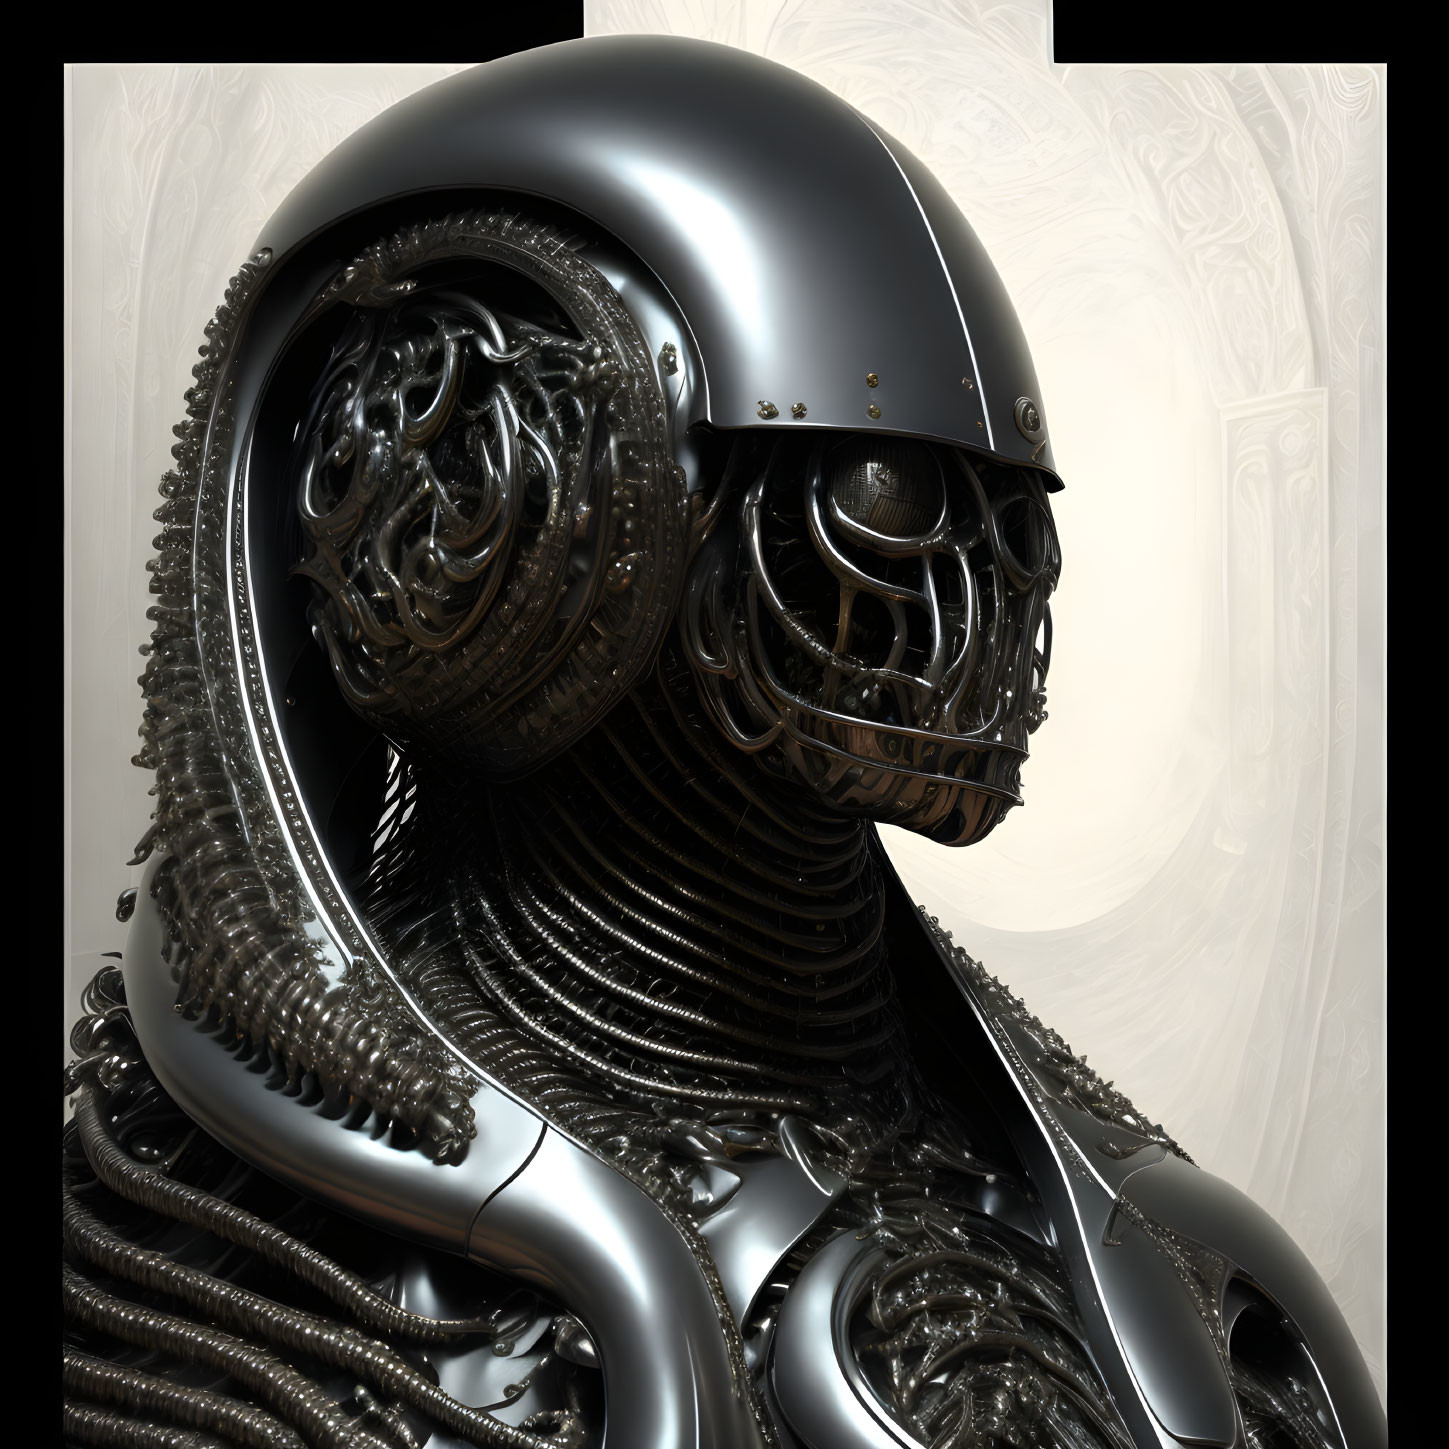 Complex futuristic robotic figure with coiled cables and metallic surfaces